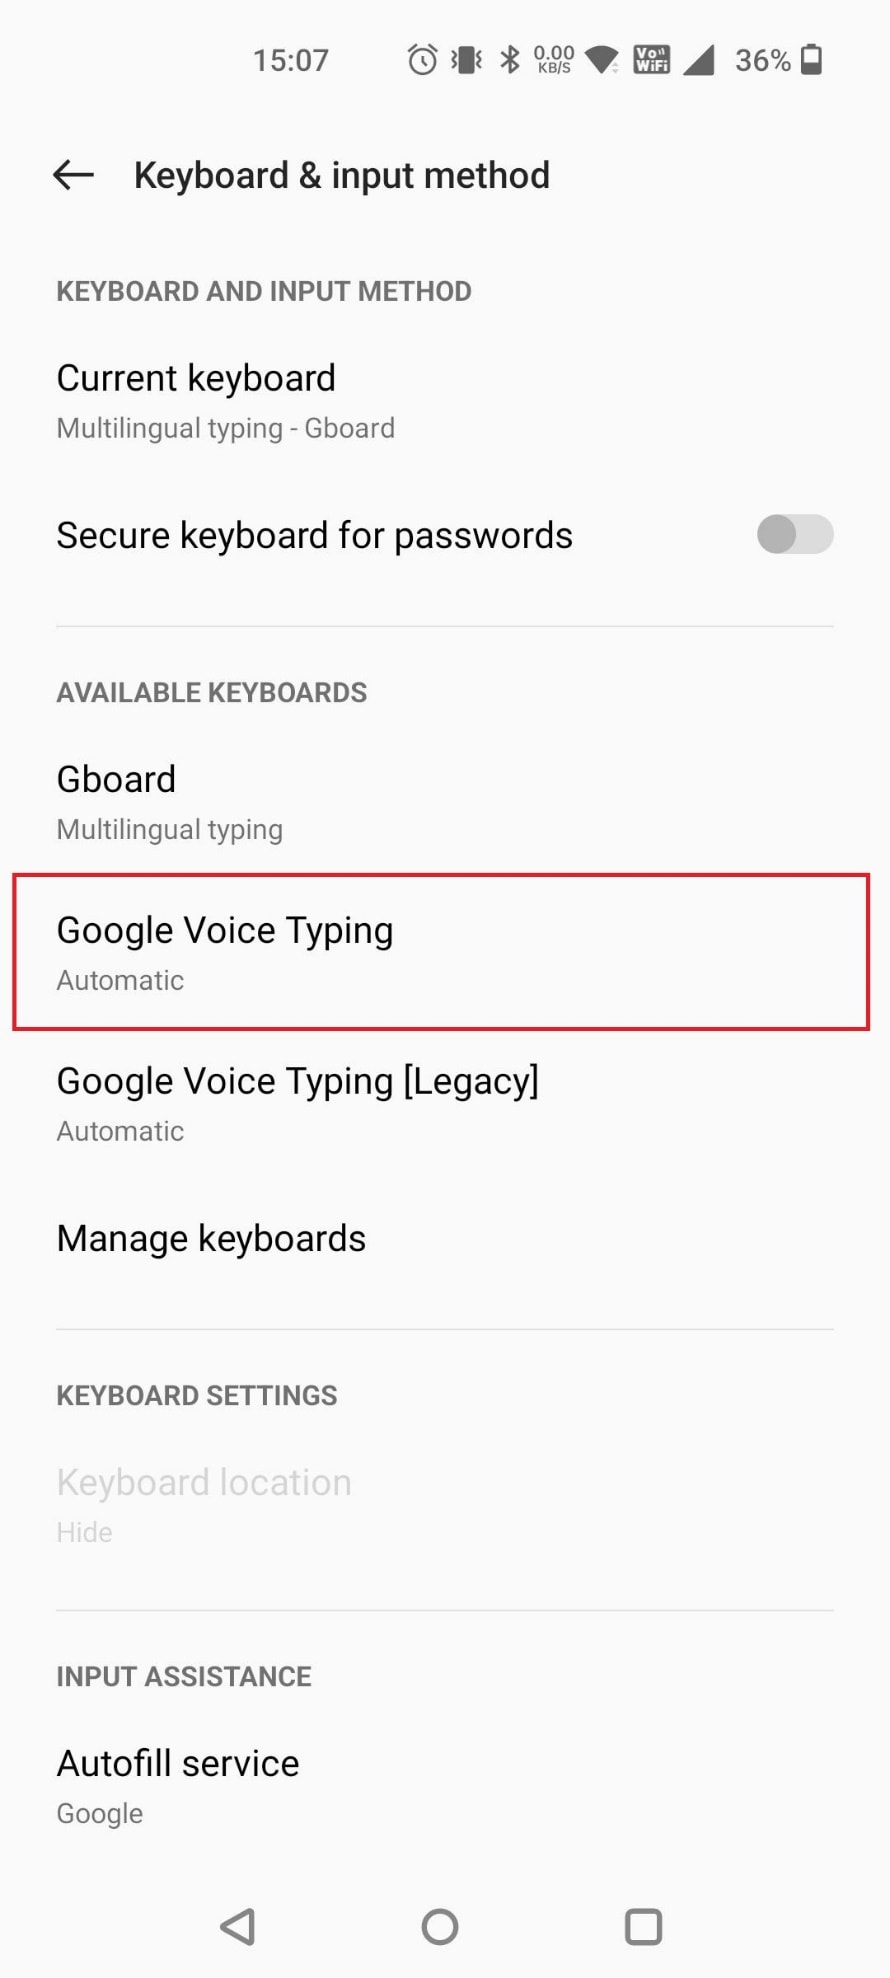 select Google Voice Typing